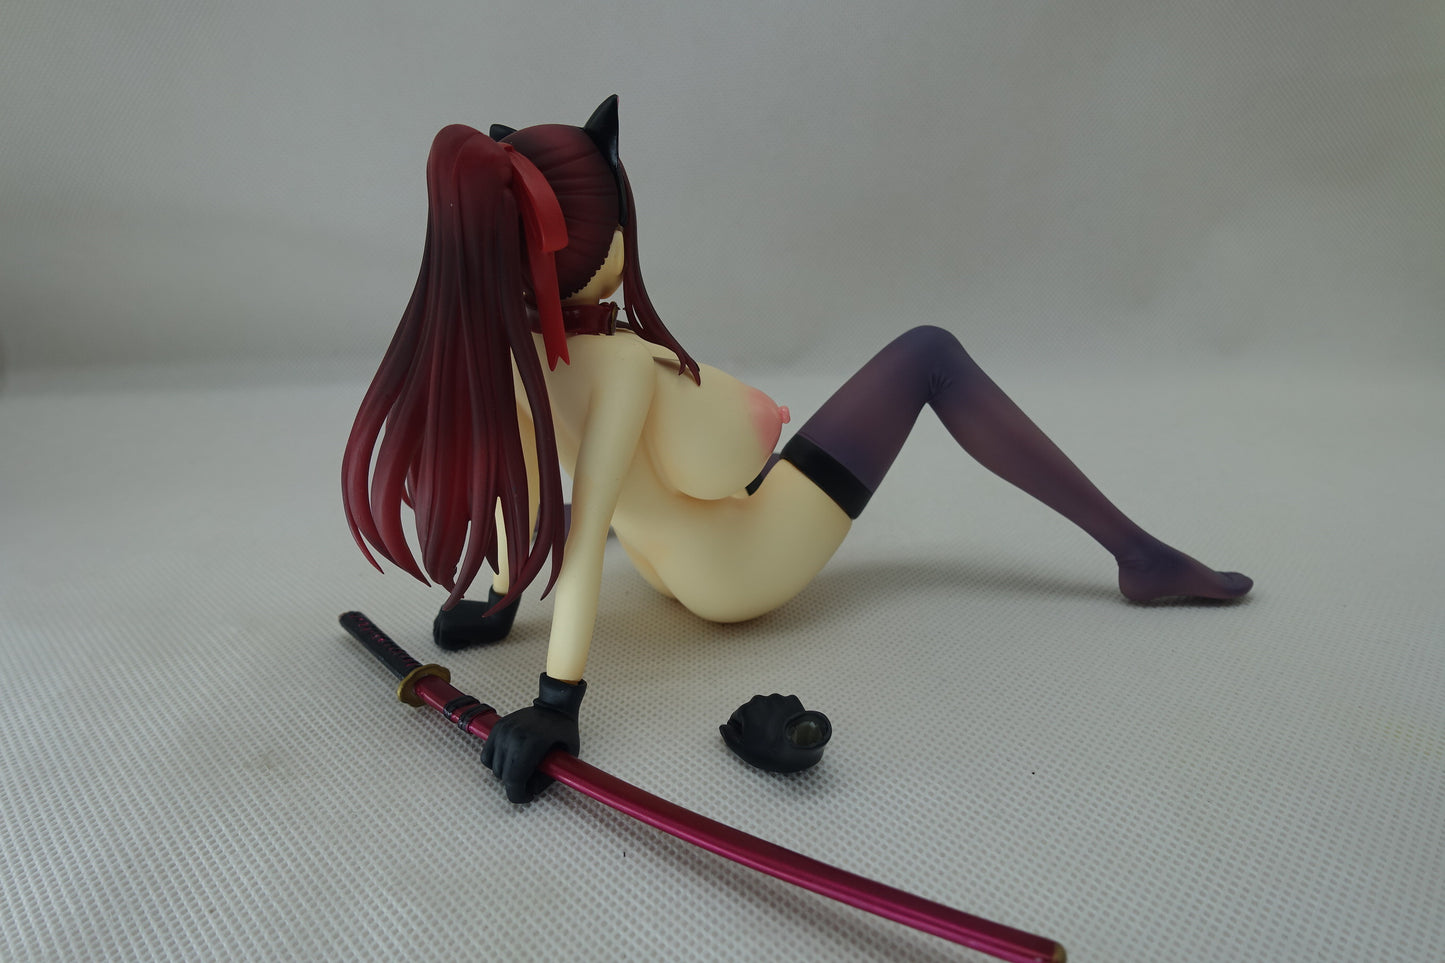 FAIRY TAIL - Wendy Marvell Black Cat Huge breast action figures 1/6 naked anime figure